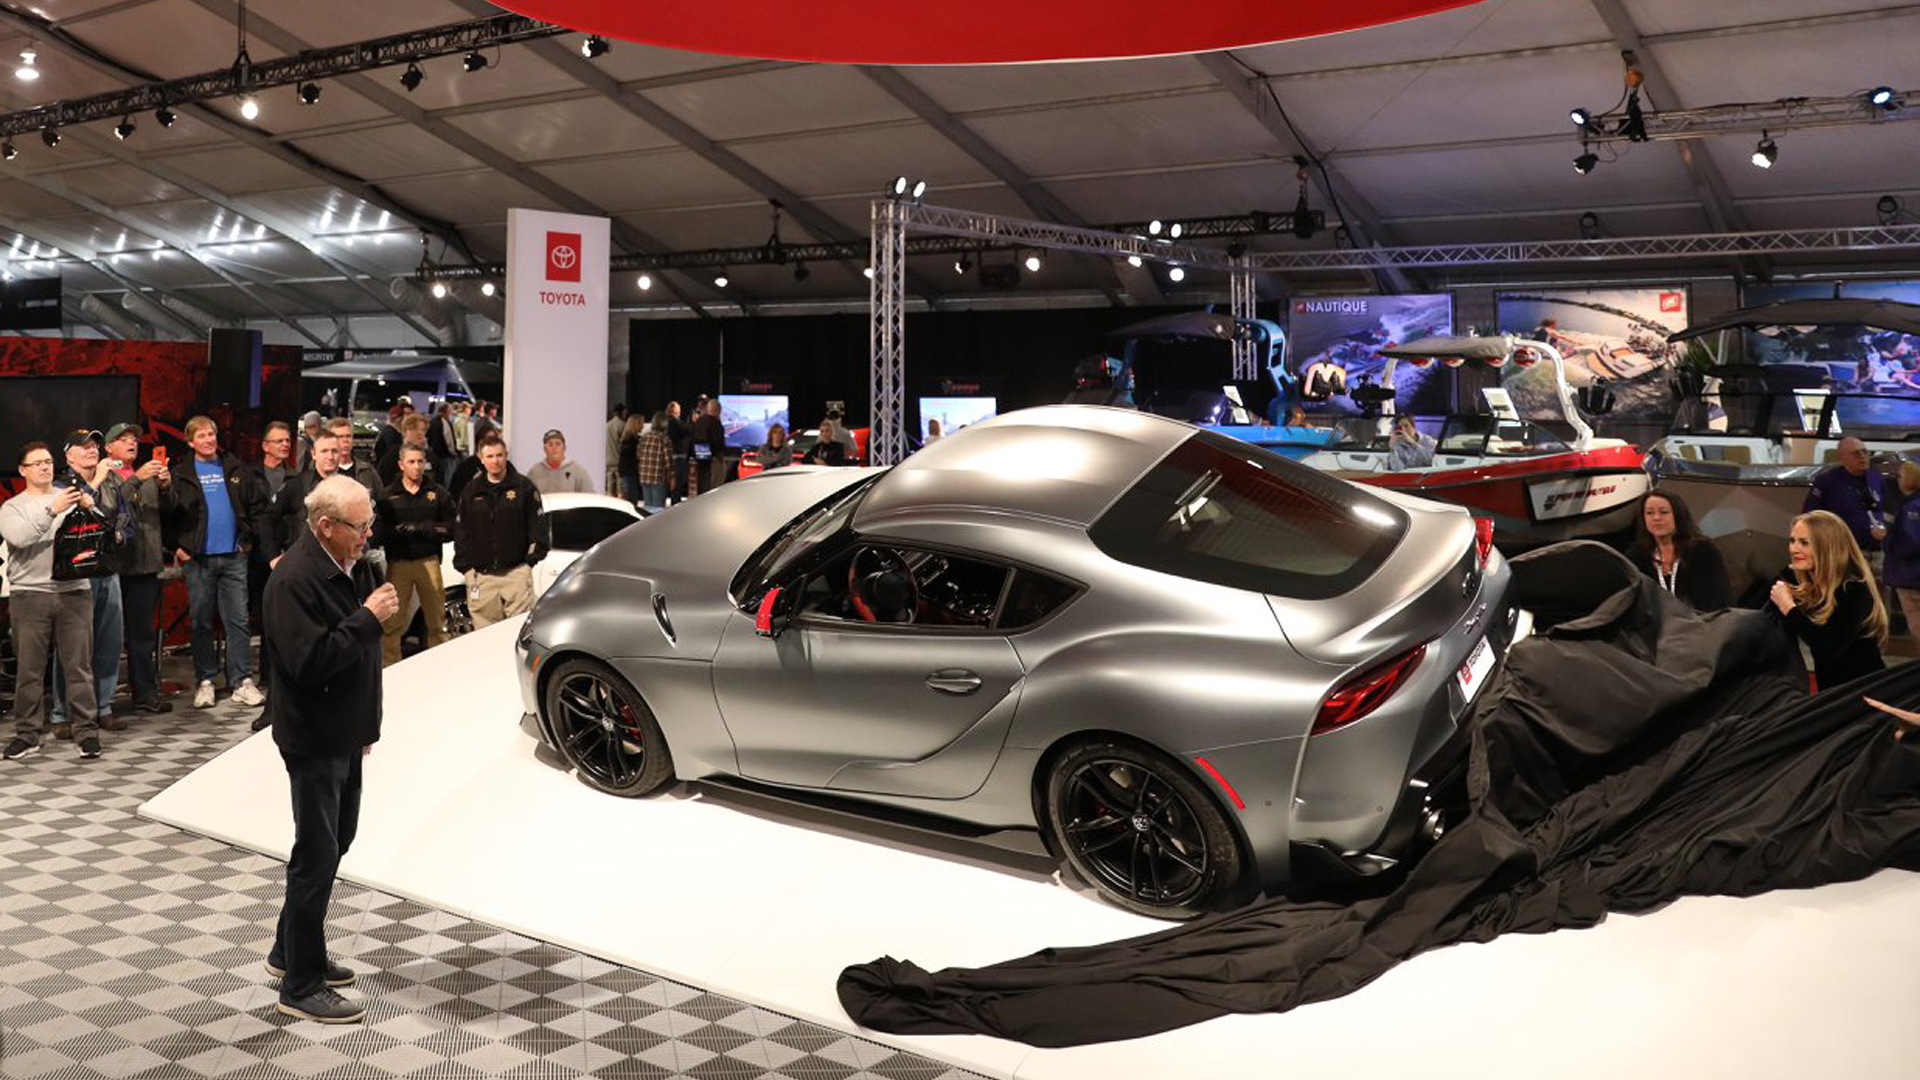 Auction of 2020 Toyota Supra with VIN ending in 01 on January 19, 2019